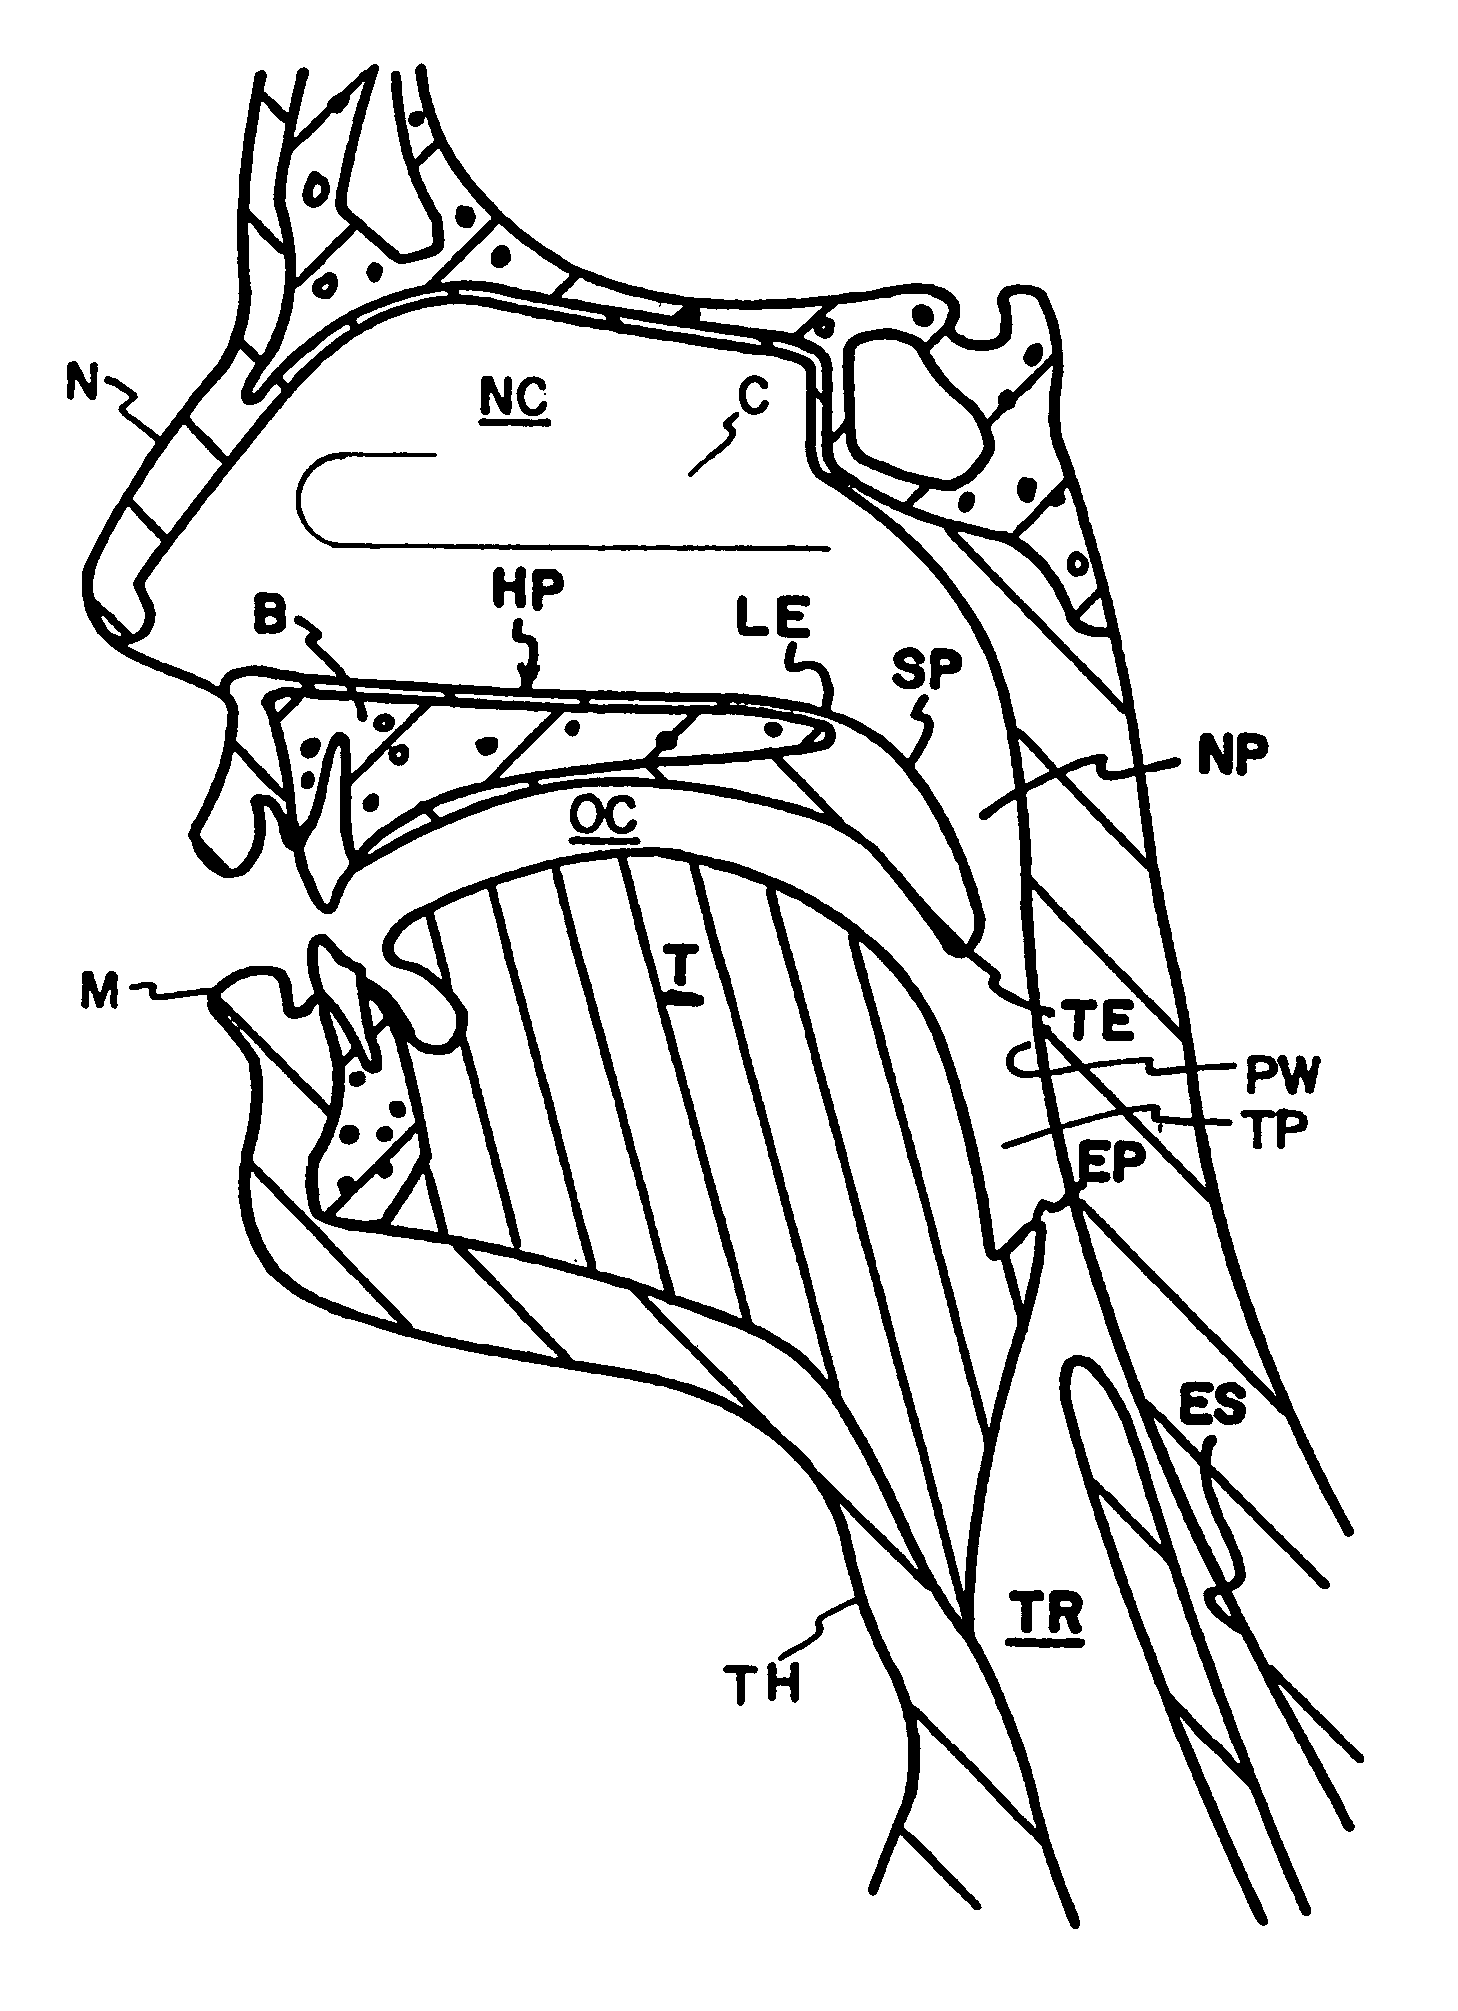 Method and apparatus to treat conditions of the naso-pharyngeal area